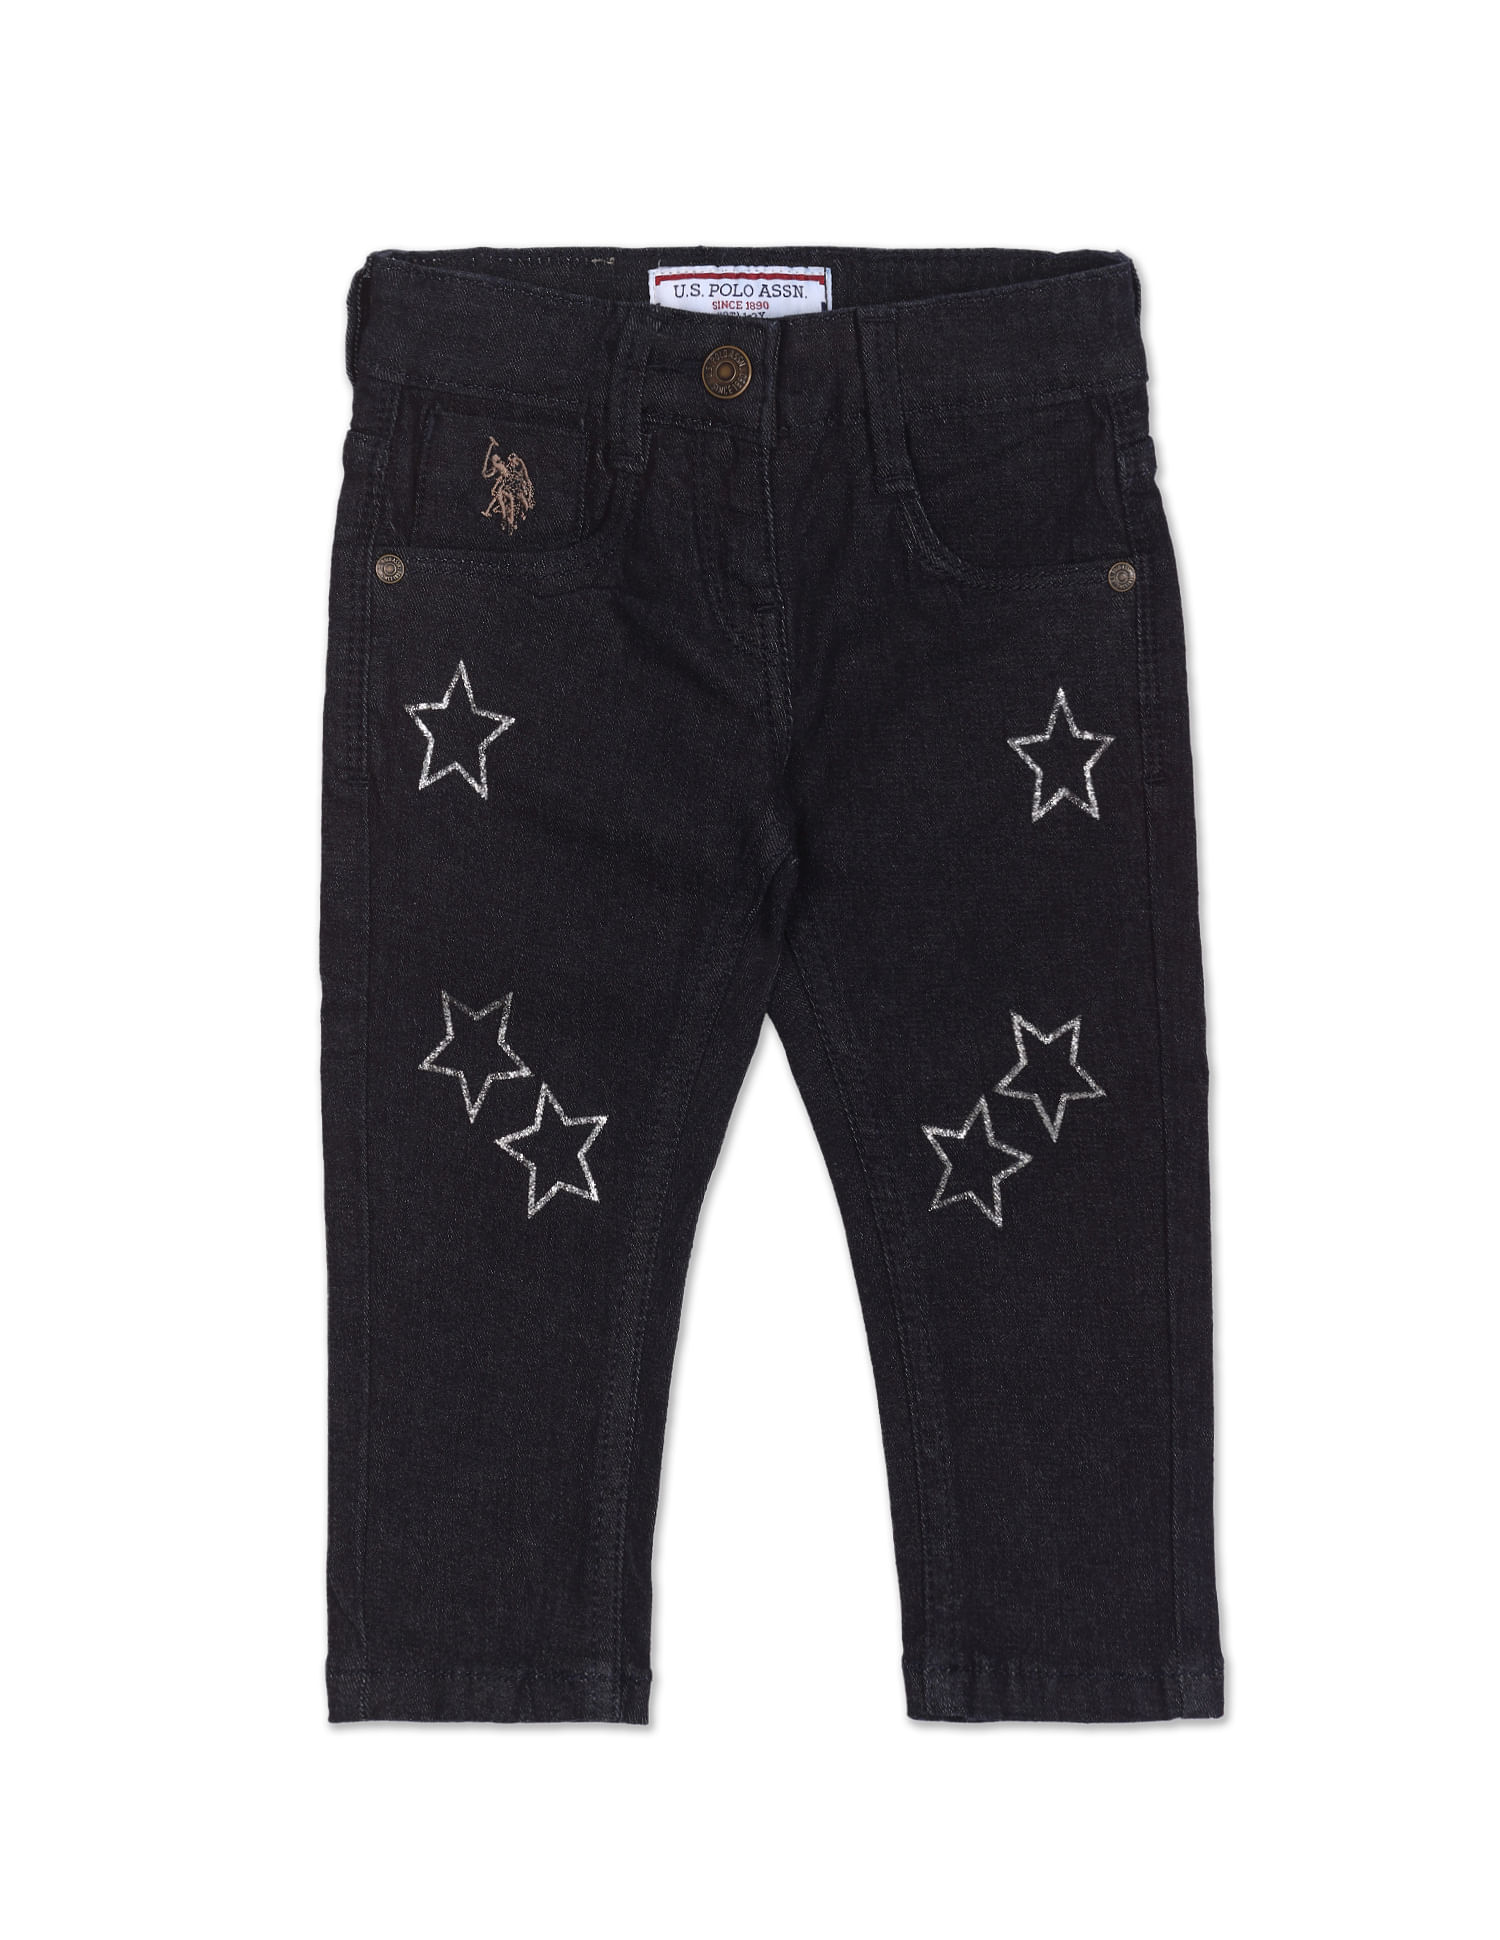 Buy US Polo Assn Kids Light Pink Solid Joggers for Girls Clothing Online   Tata CLiQ